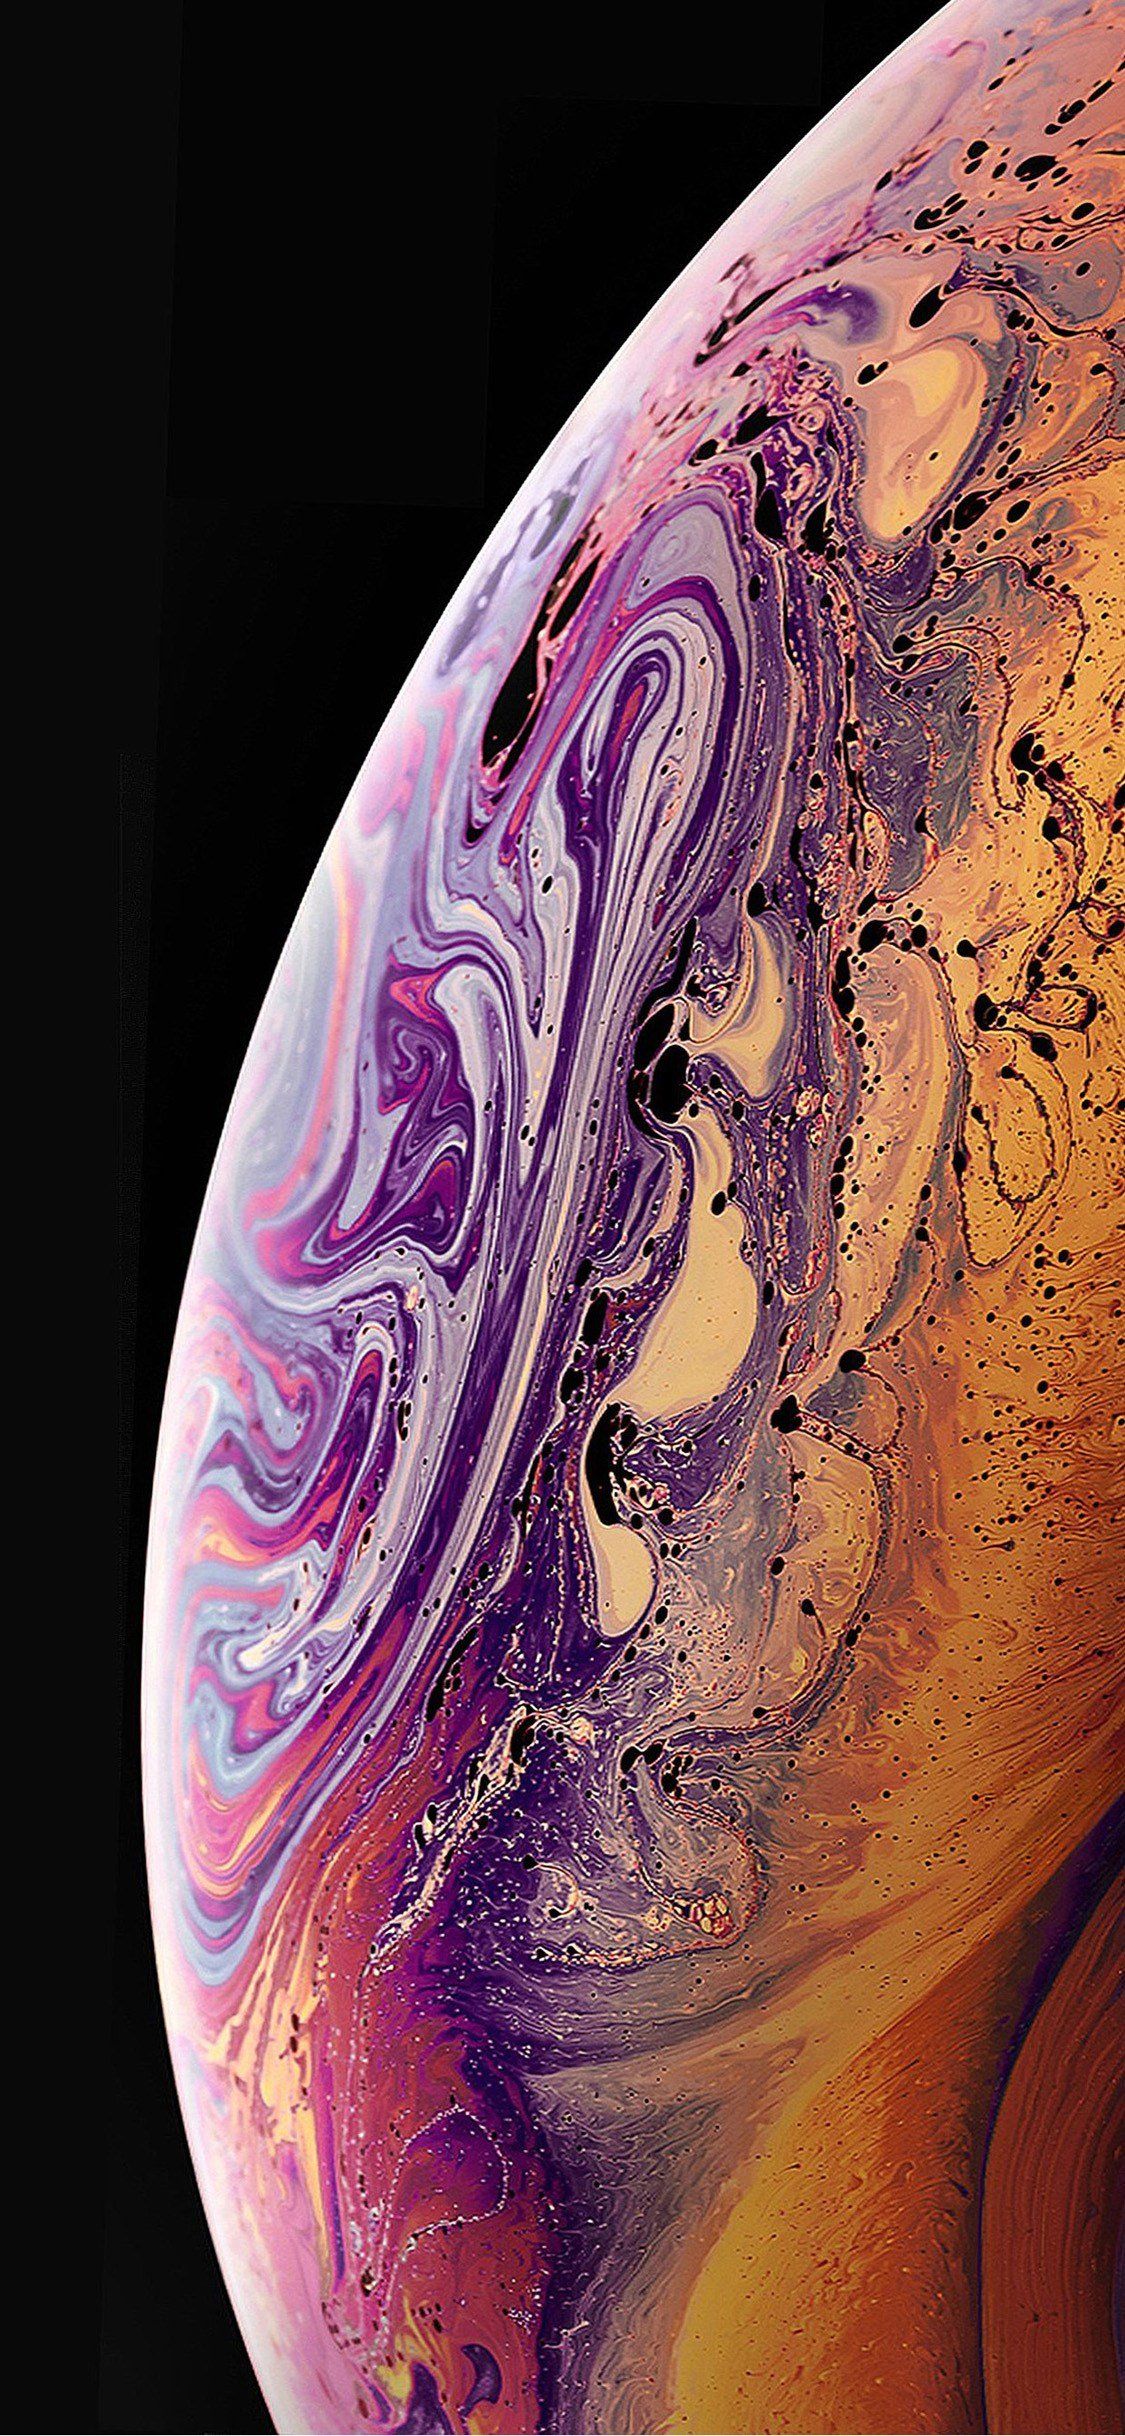 iPhone Xs Max Stock Wallpapers - Wallpaper Cave